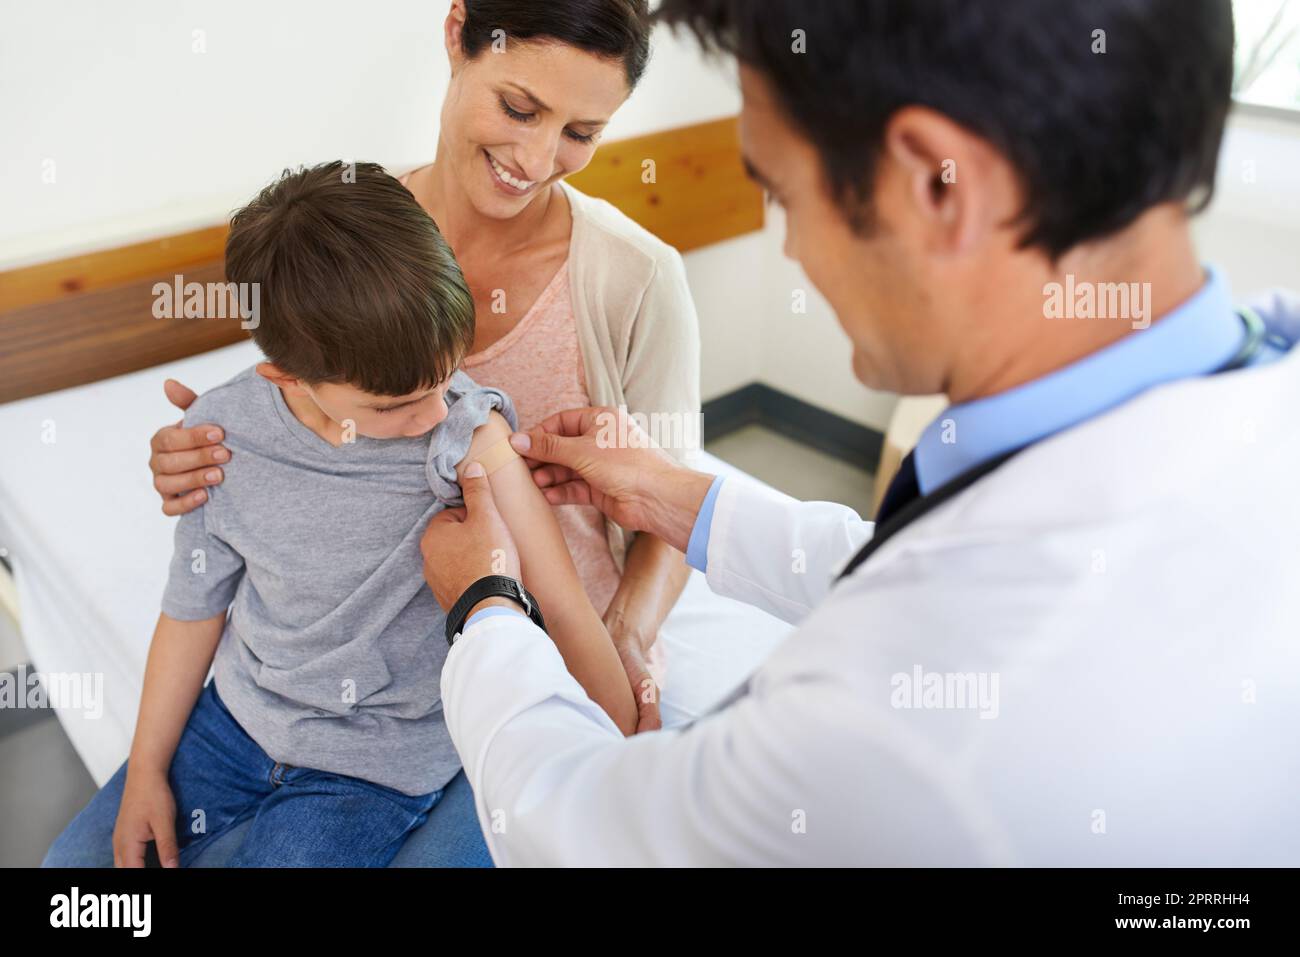 Heres a badge of bravery to show your friends. a mother watching her son being taken care of by his doctor. Stock Photo